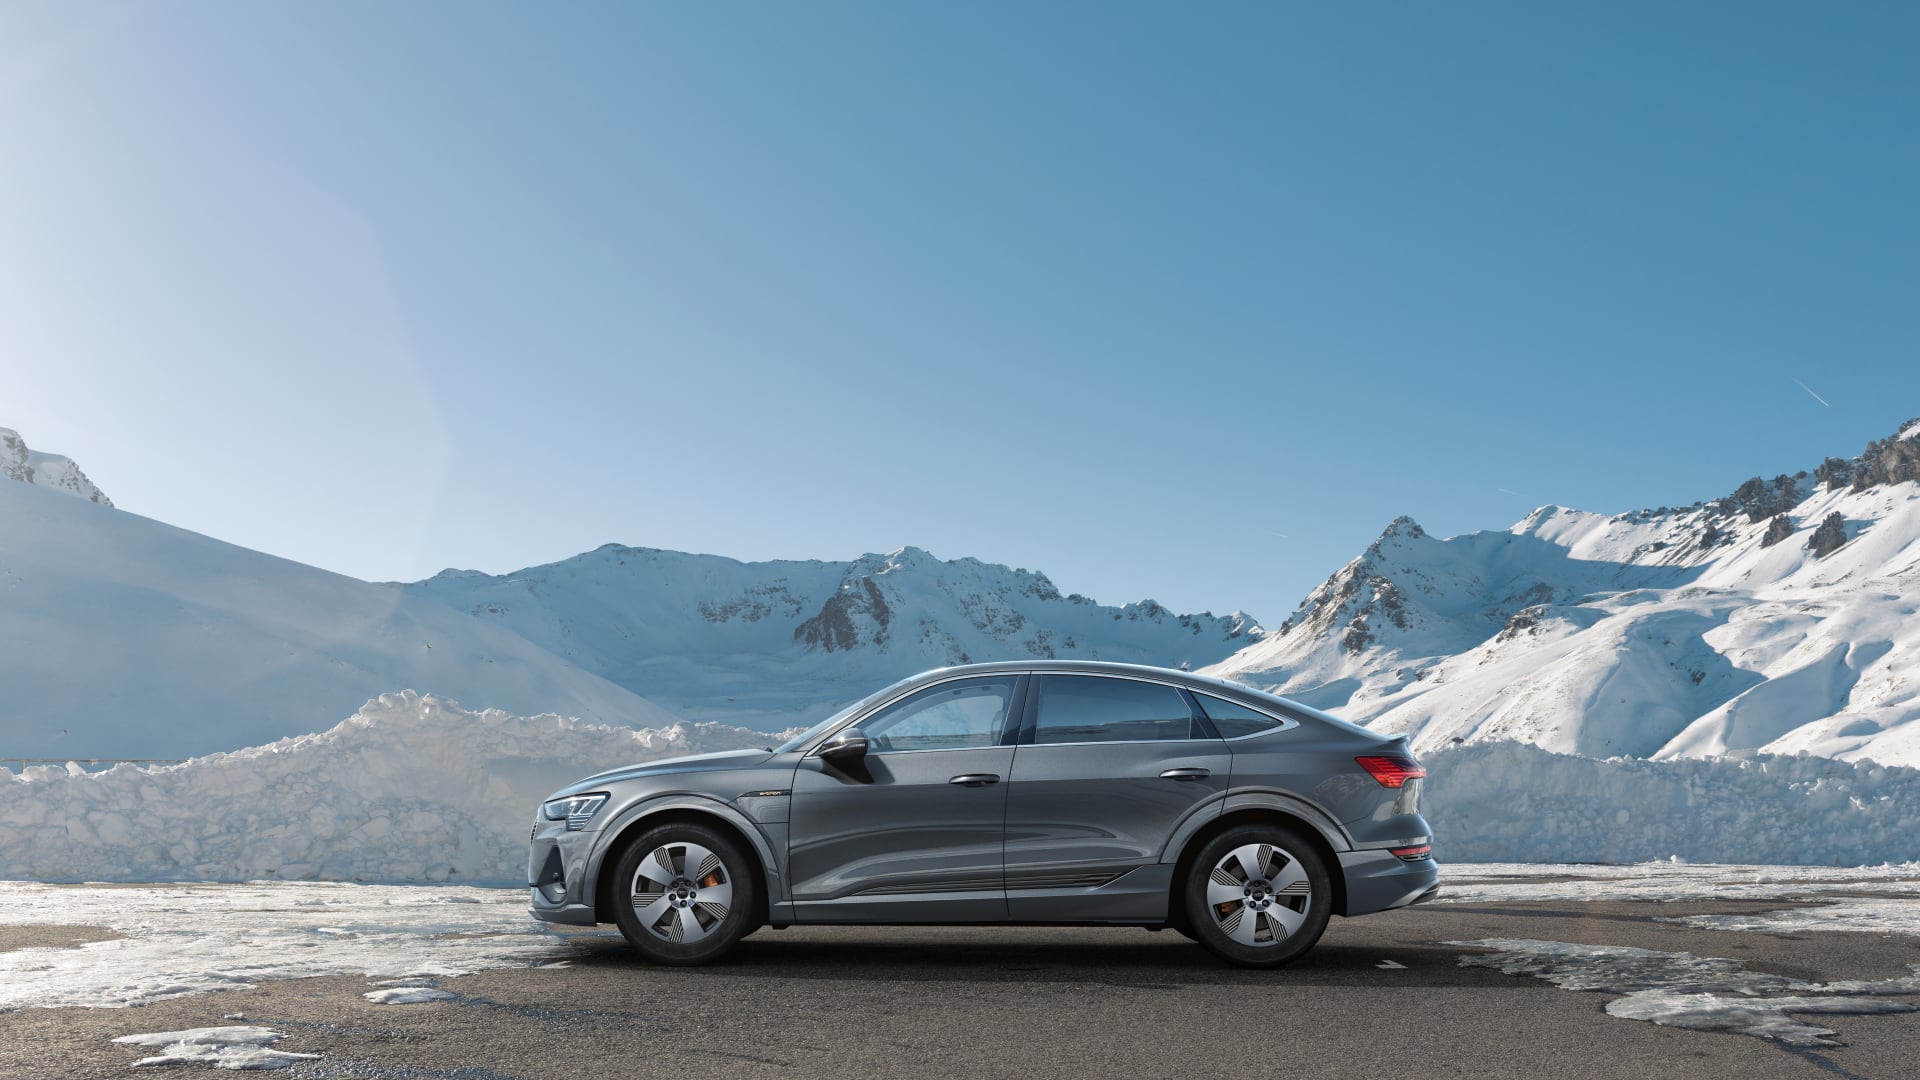 An e-tron parked in the mountains